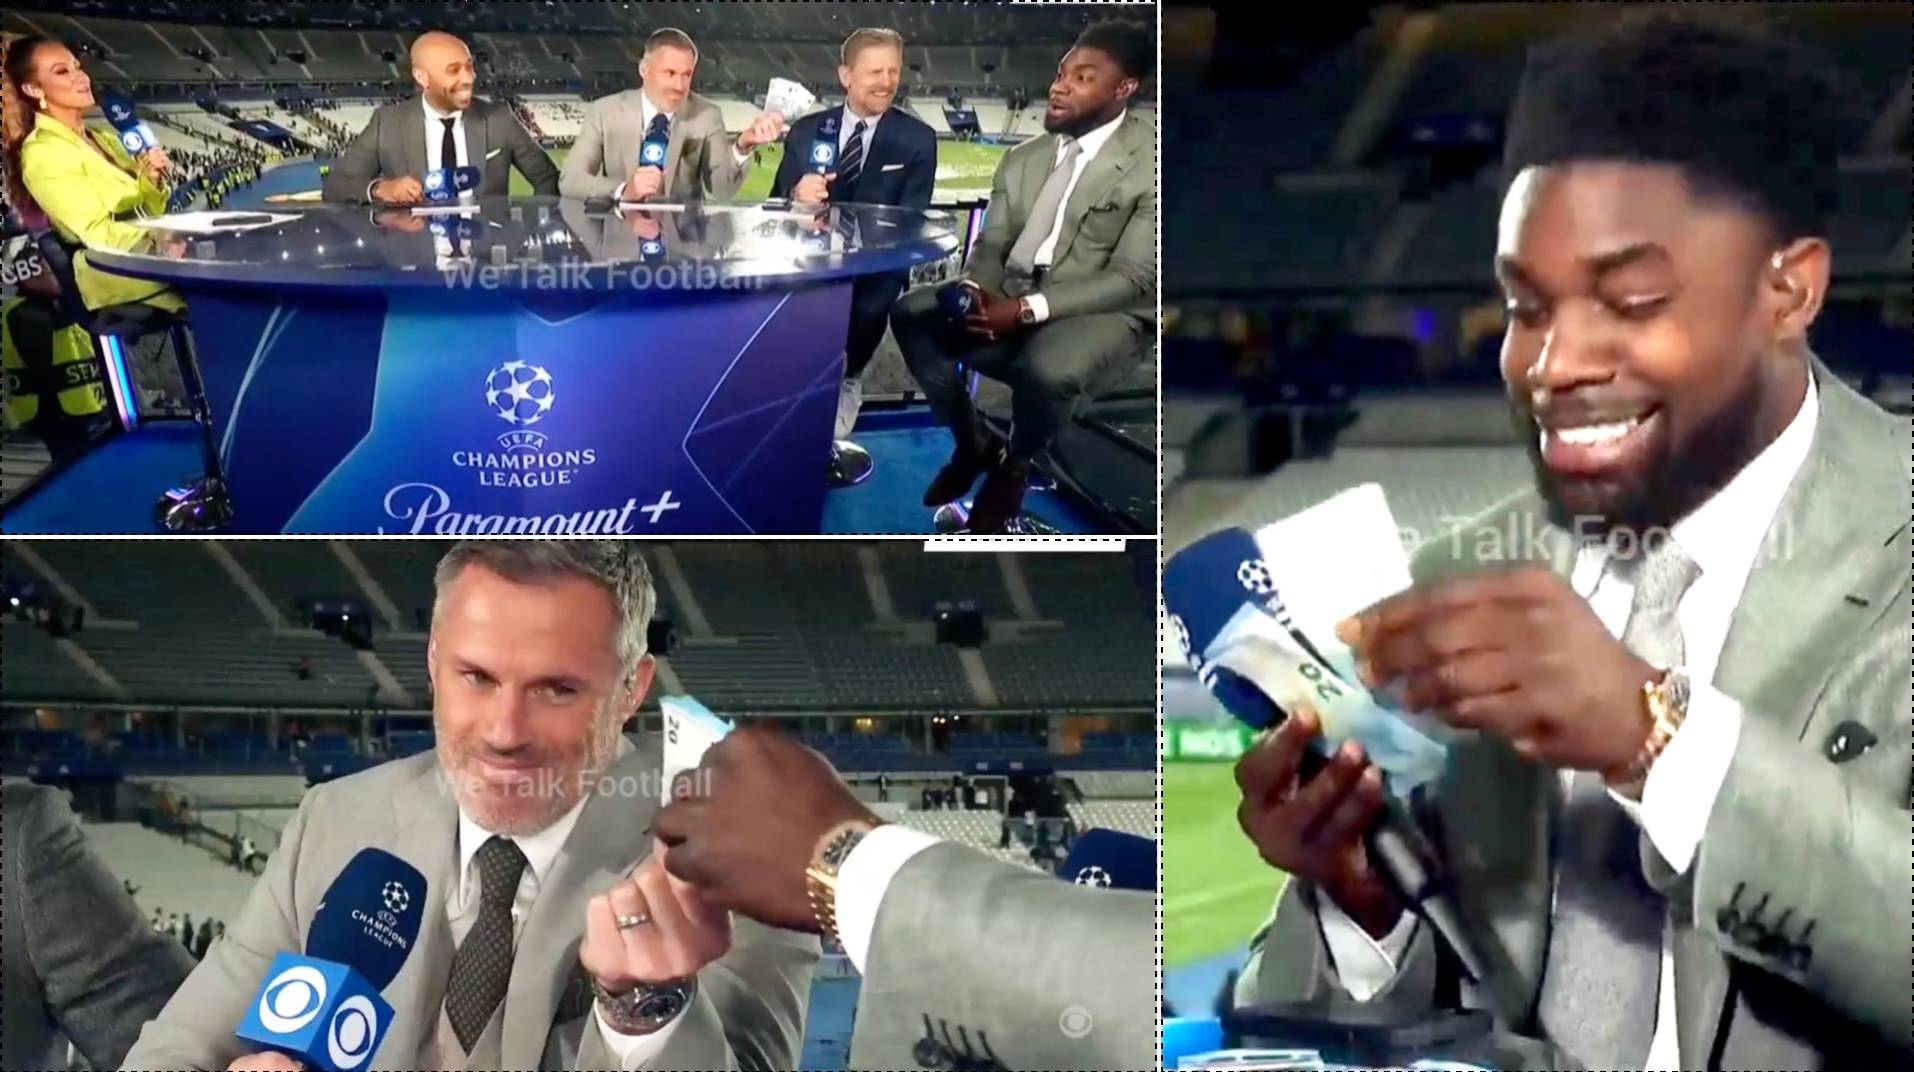 Jamie Carragher’s Real Madrid comments come back to bite him as he loses bet to Micah Richards